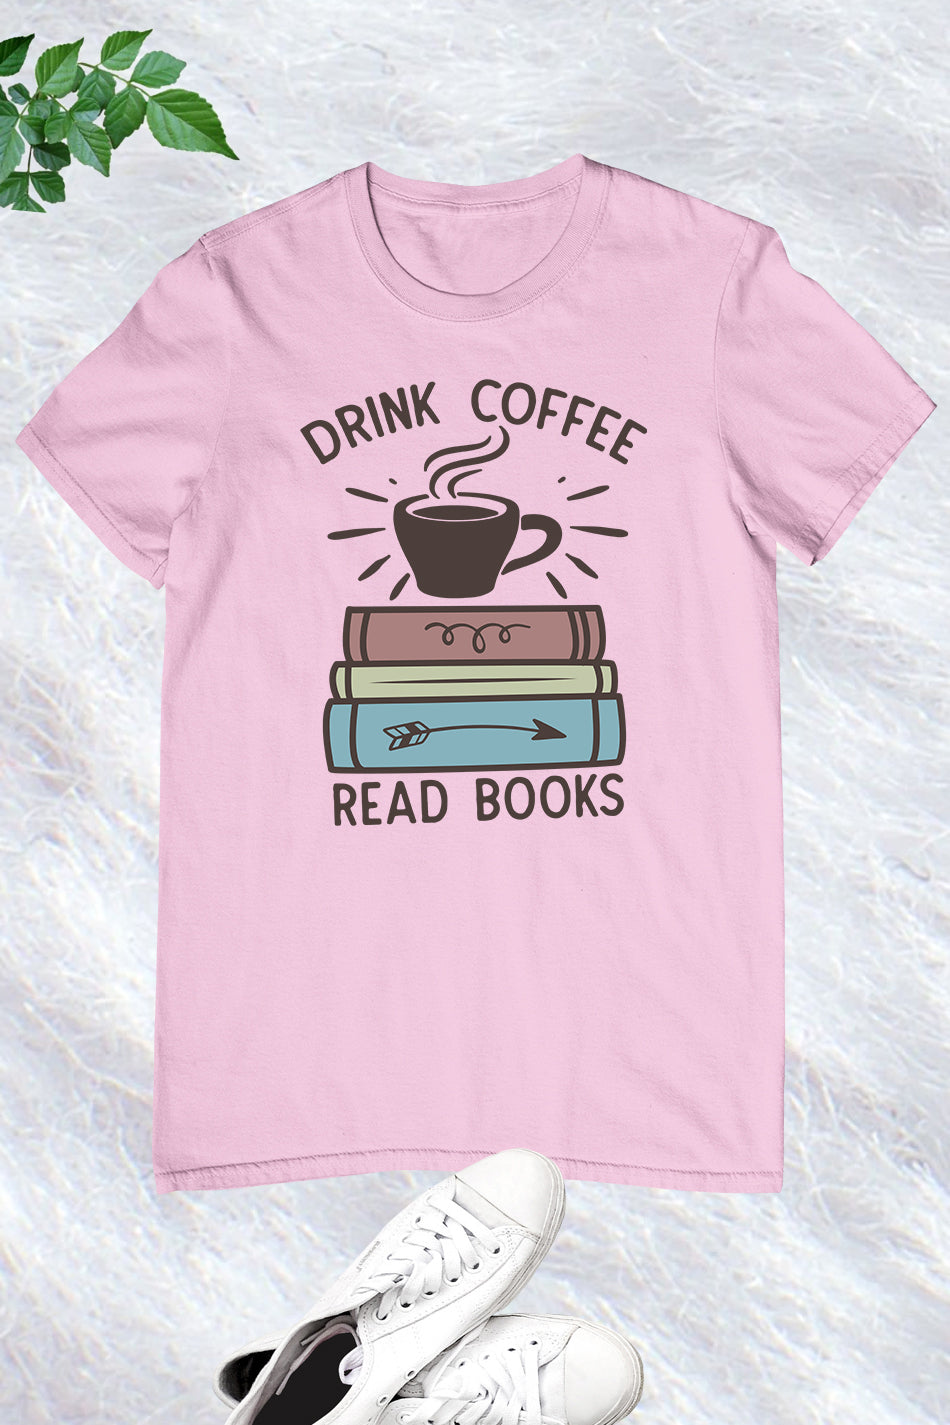 Savor the moment with our 'Drink Coffee, Read Books' shirt. Perfect for those cozy reading sessions with your favorite brew. Crafted with comfort and quality in mind. #CoffeeLovers #Bookworms #ReadingTime